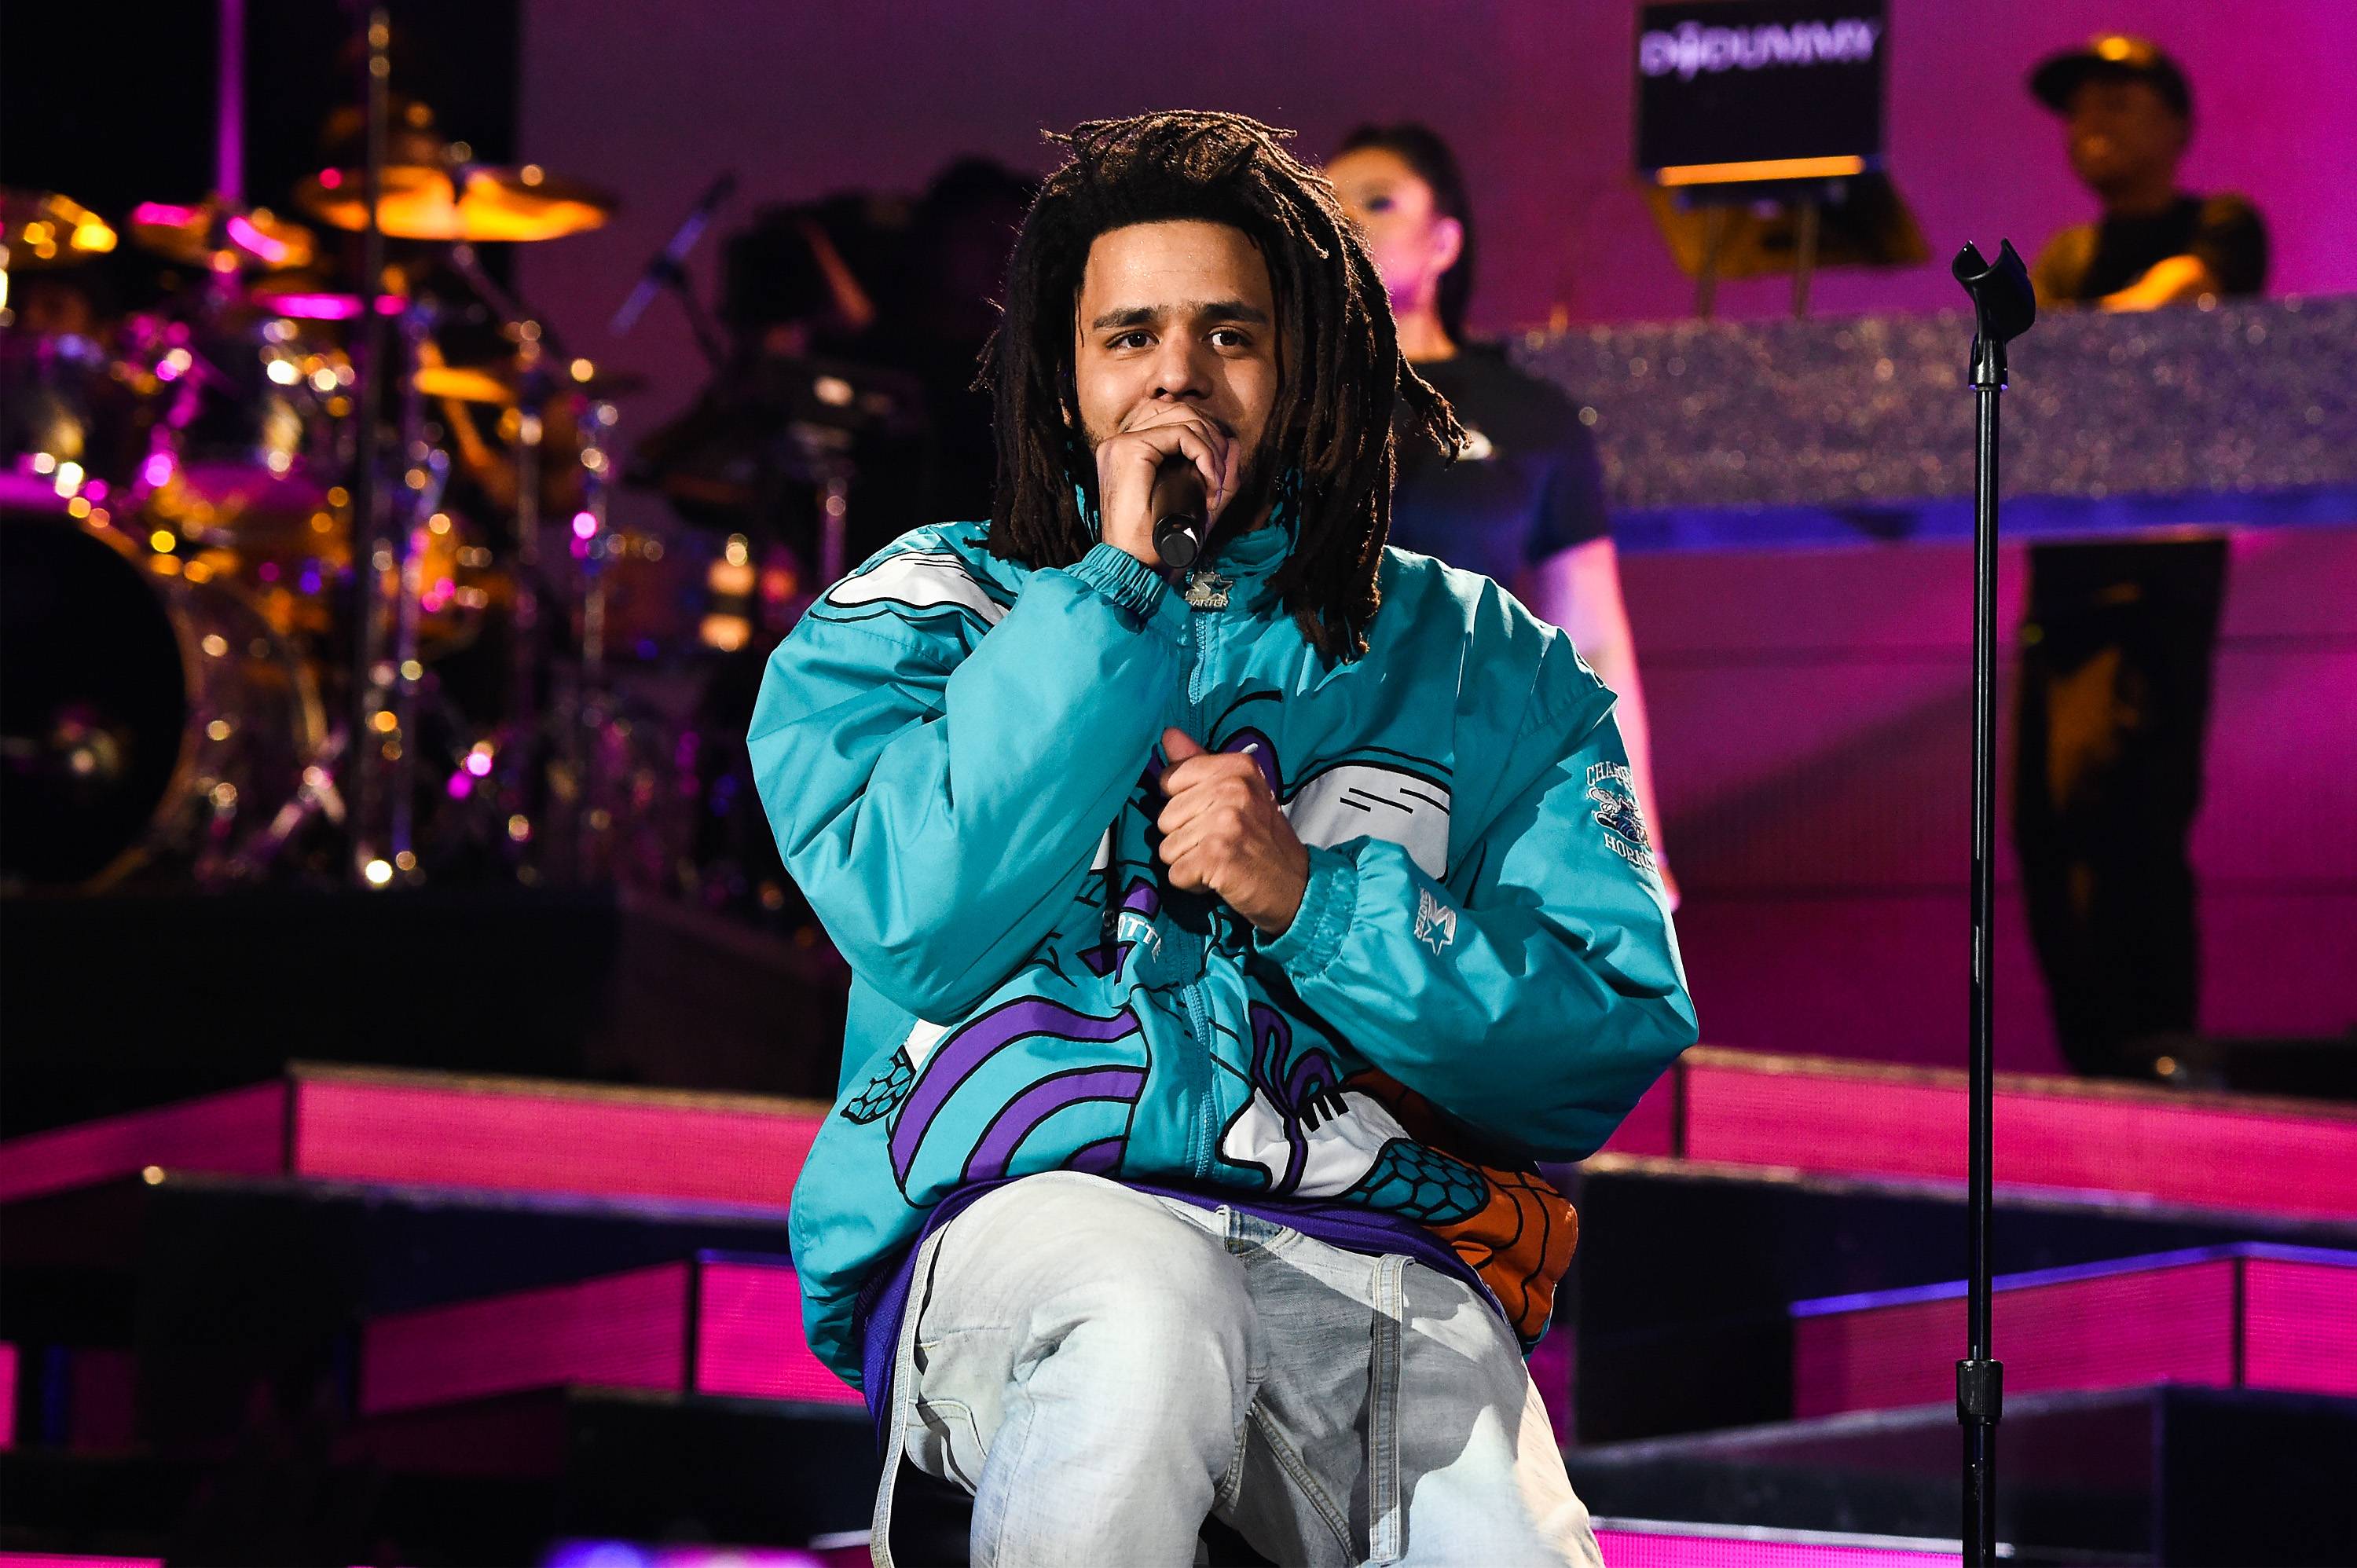 CHARLOTTE, NC - FEBRUARY 17:  J. Cole performs at halftime during the 68th NBA All-Star Game at Spectrum Center on February 17, 2019 in Charlotte, North Carolina.  (Photo by Kevin Mazur/WireImage)